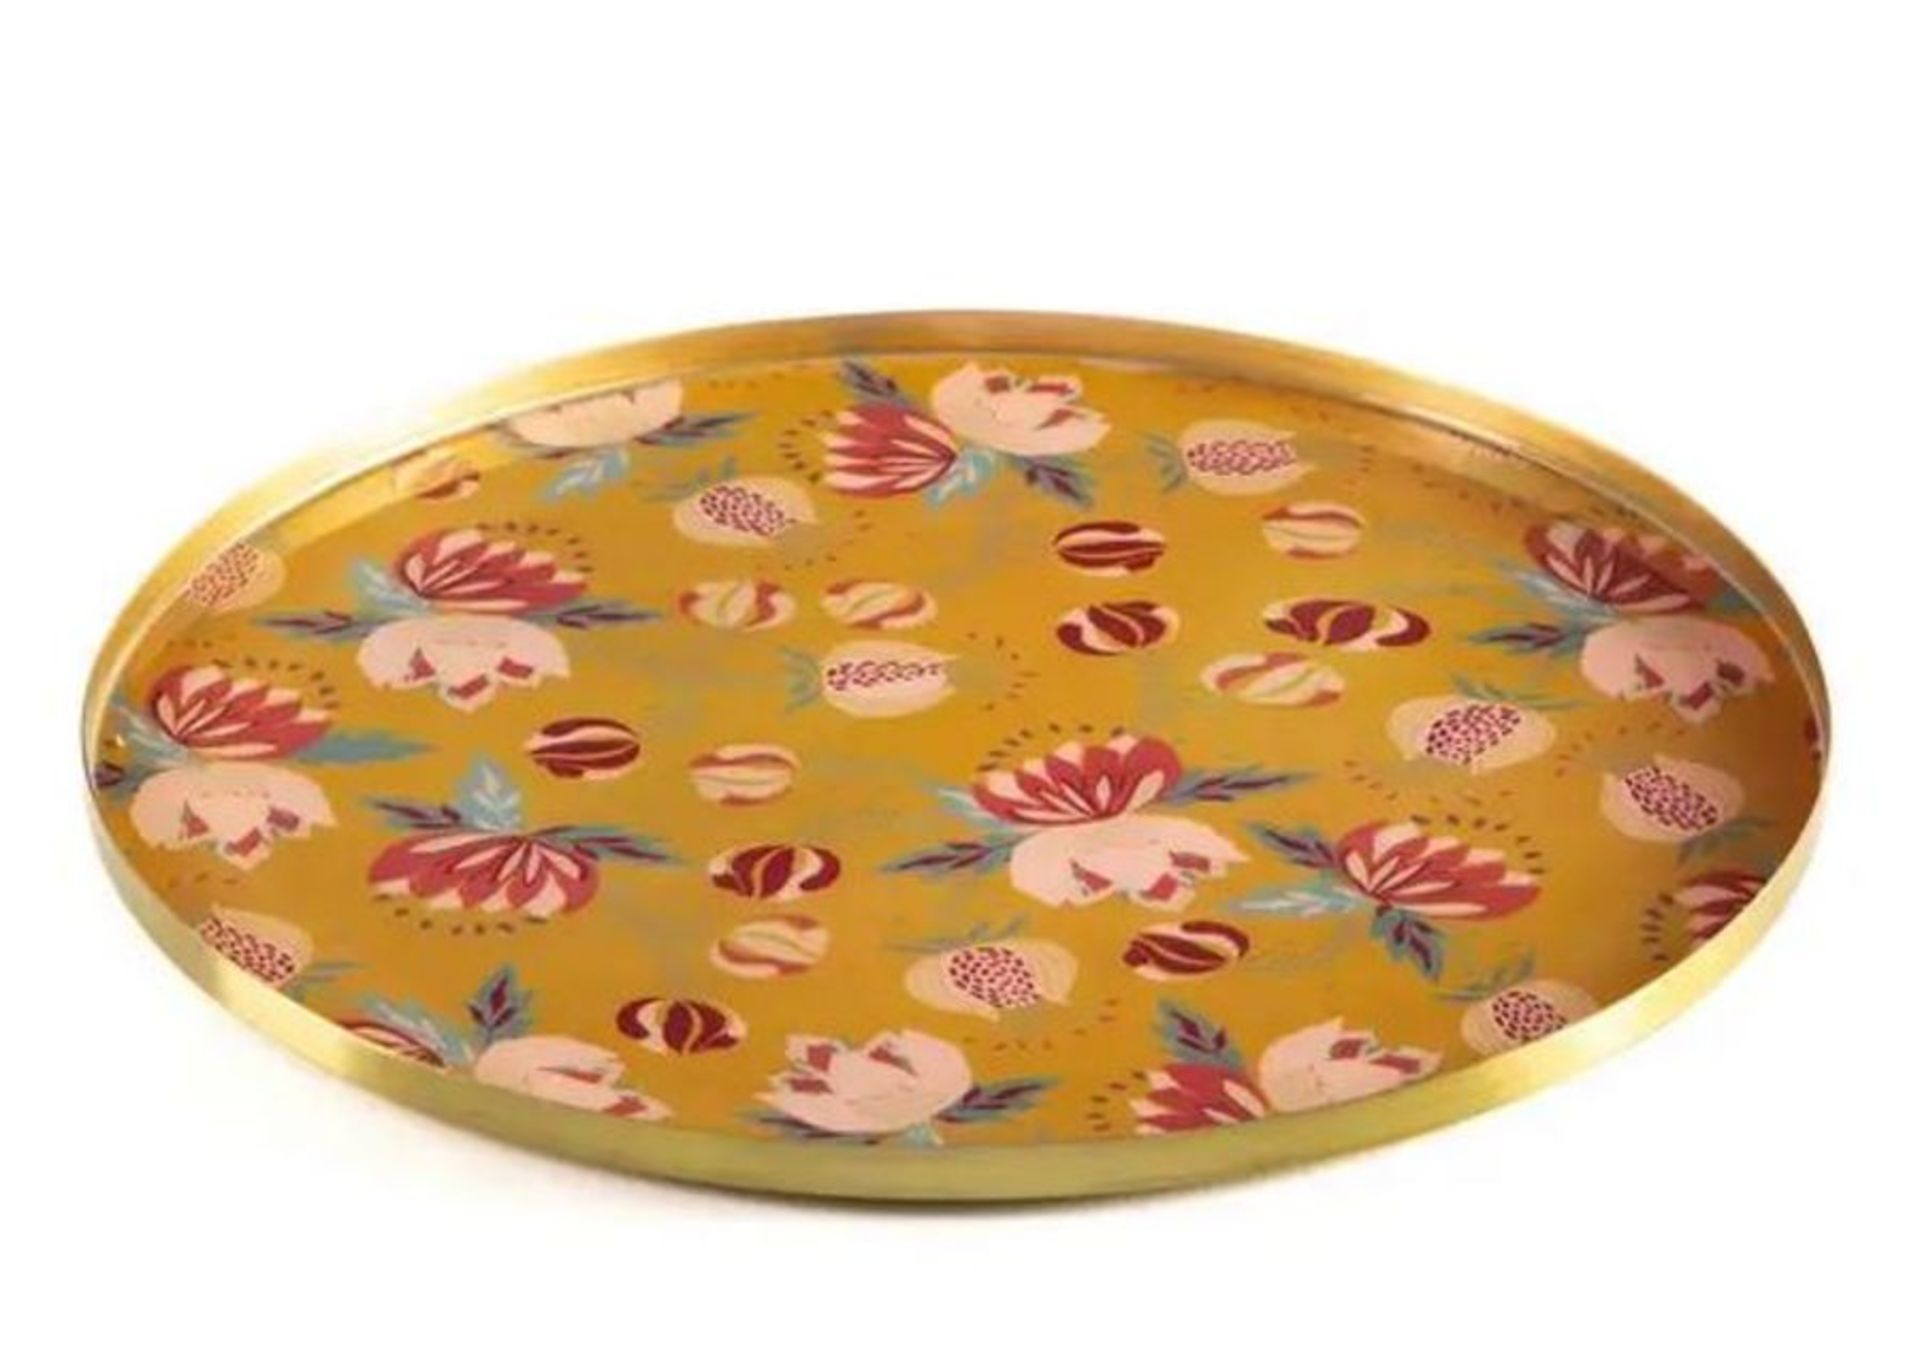 AMBRE ROUND TRAY / RRP £42.00 / CUSTOMER RETURN. GRADE B, SOME EDGE WEAR, SIGNS OF USE